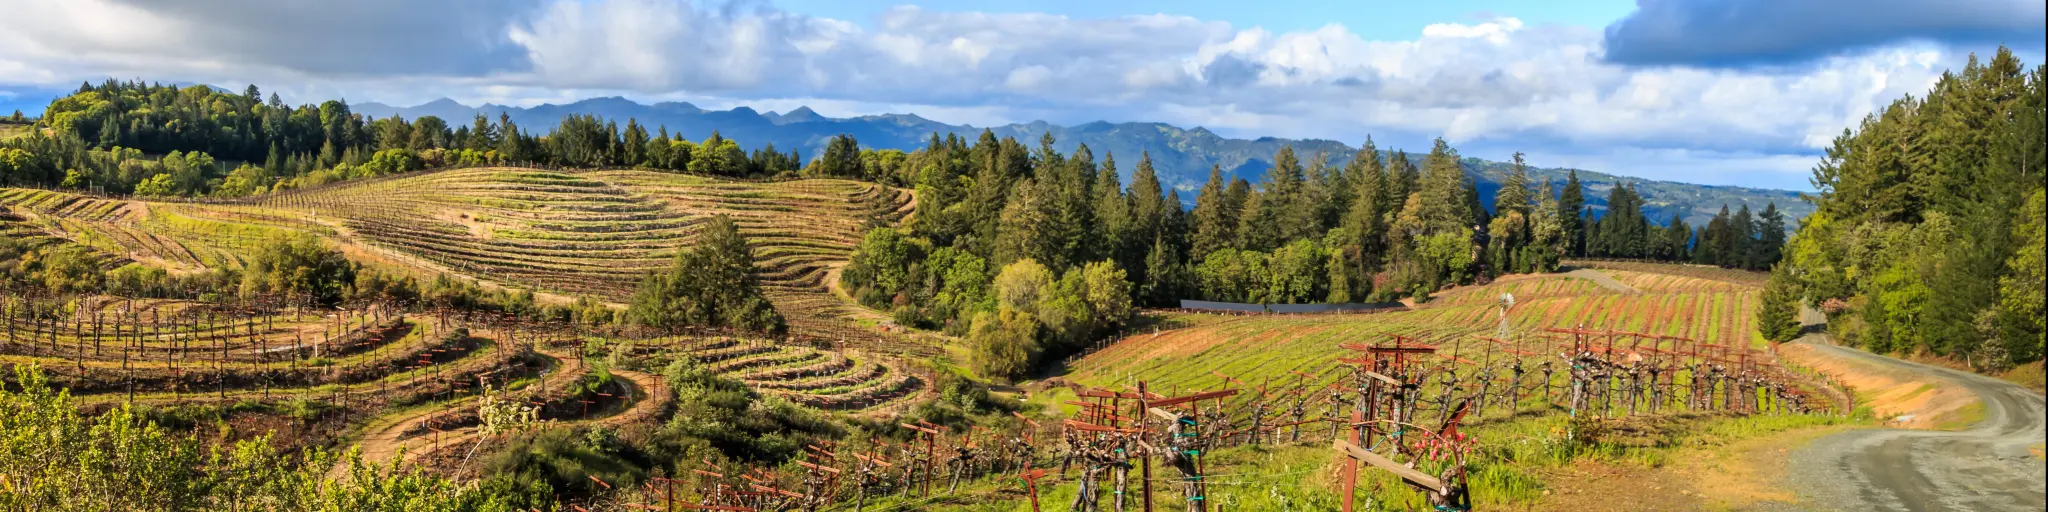 Panoramic View of Napa Valley Vineyards with undulating hills and a blue sky with clouds above